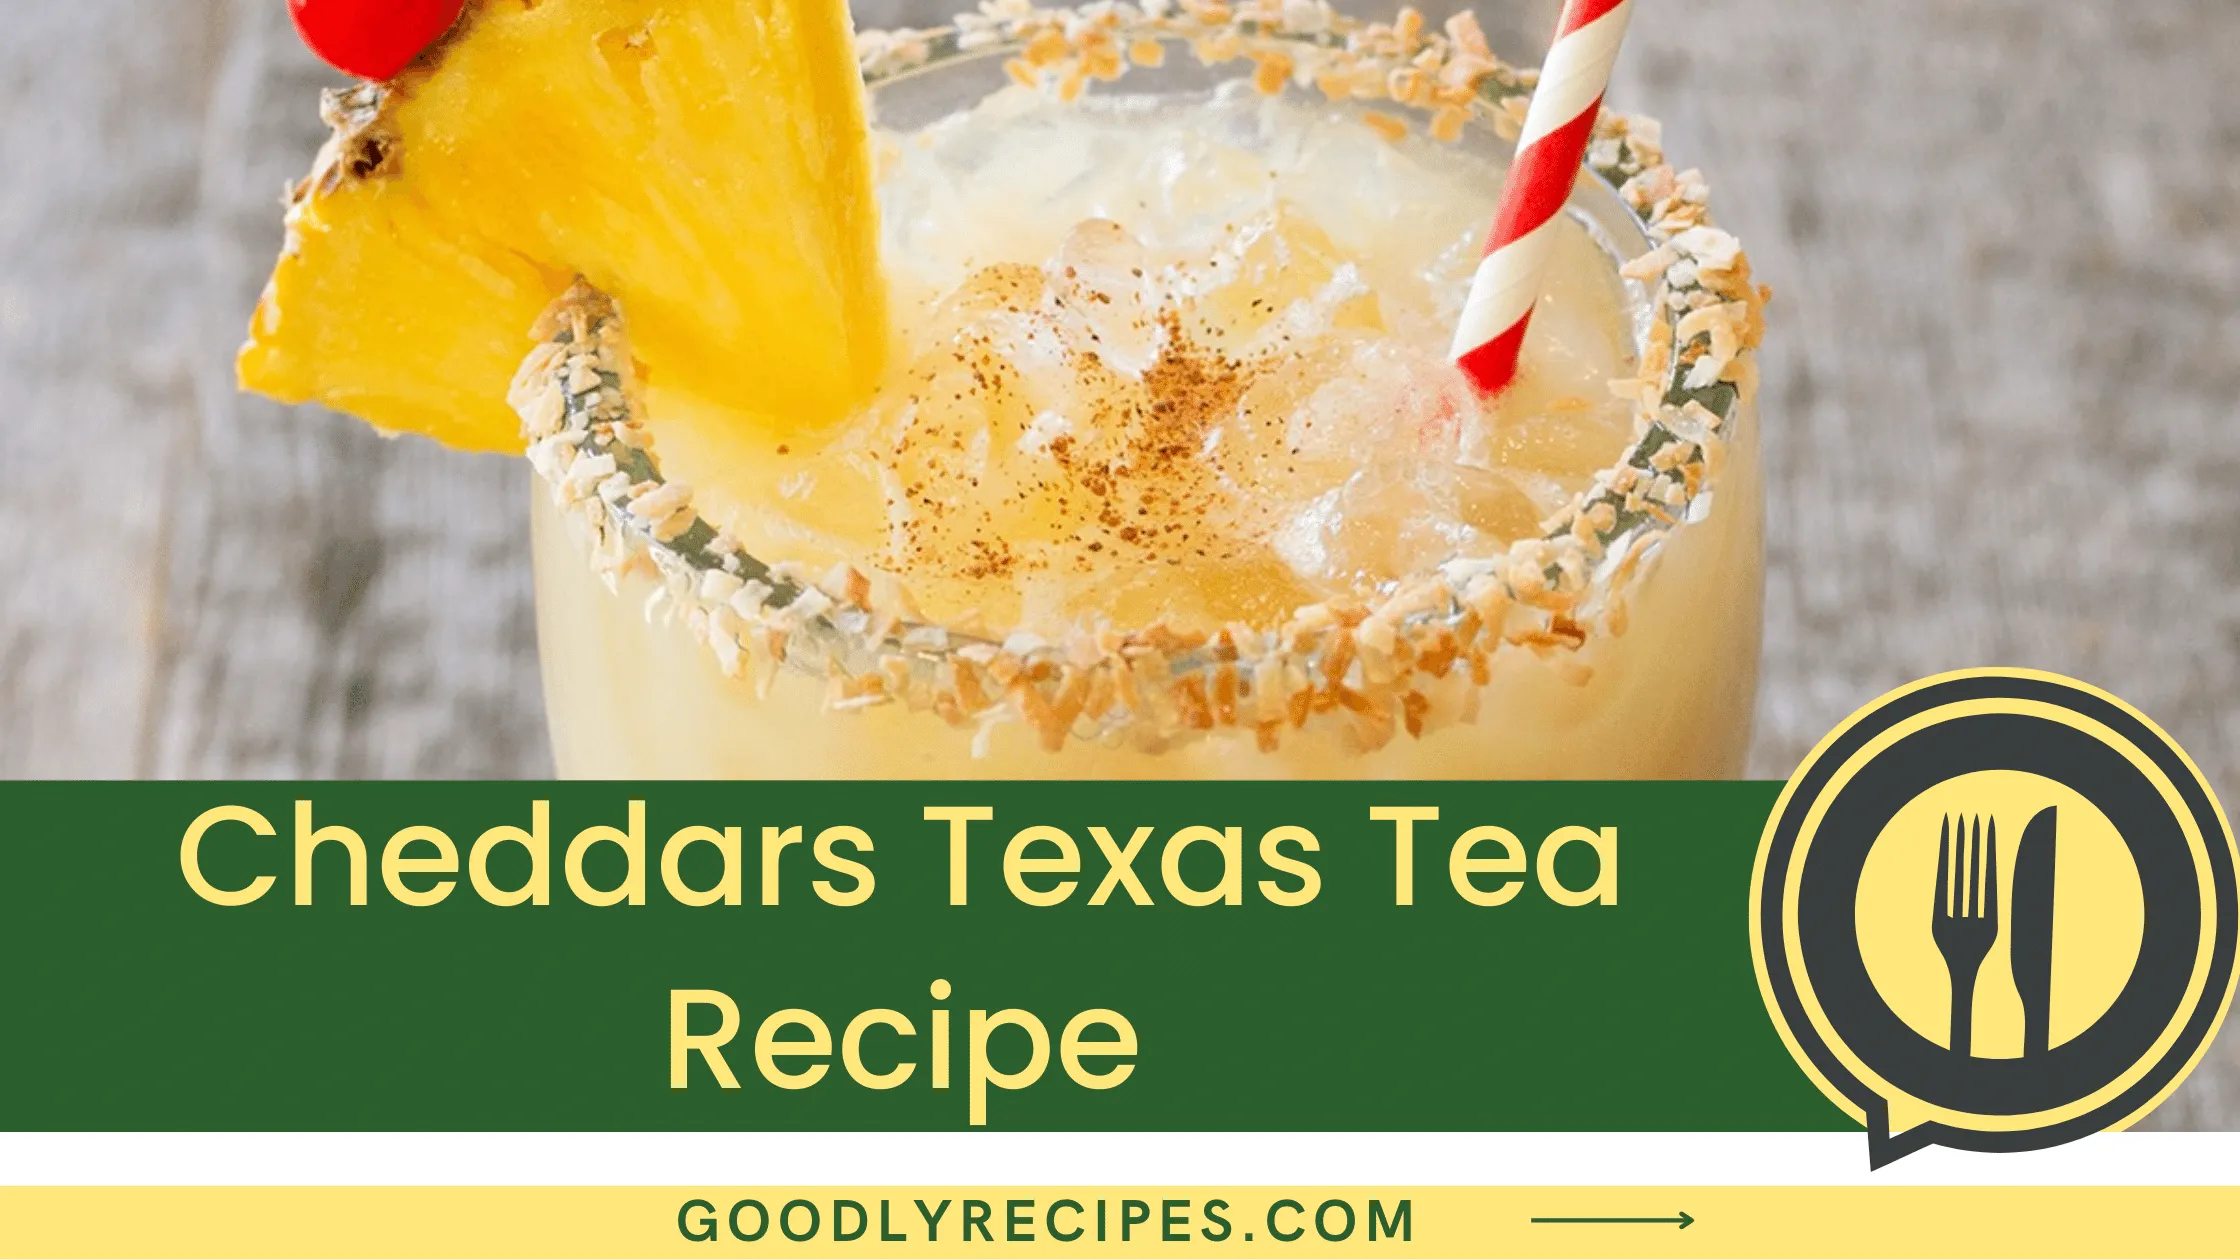 What Is Cheddars Texas Tea?